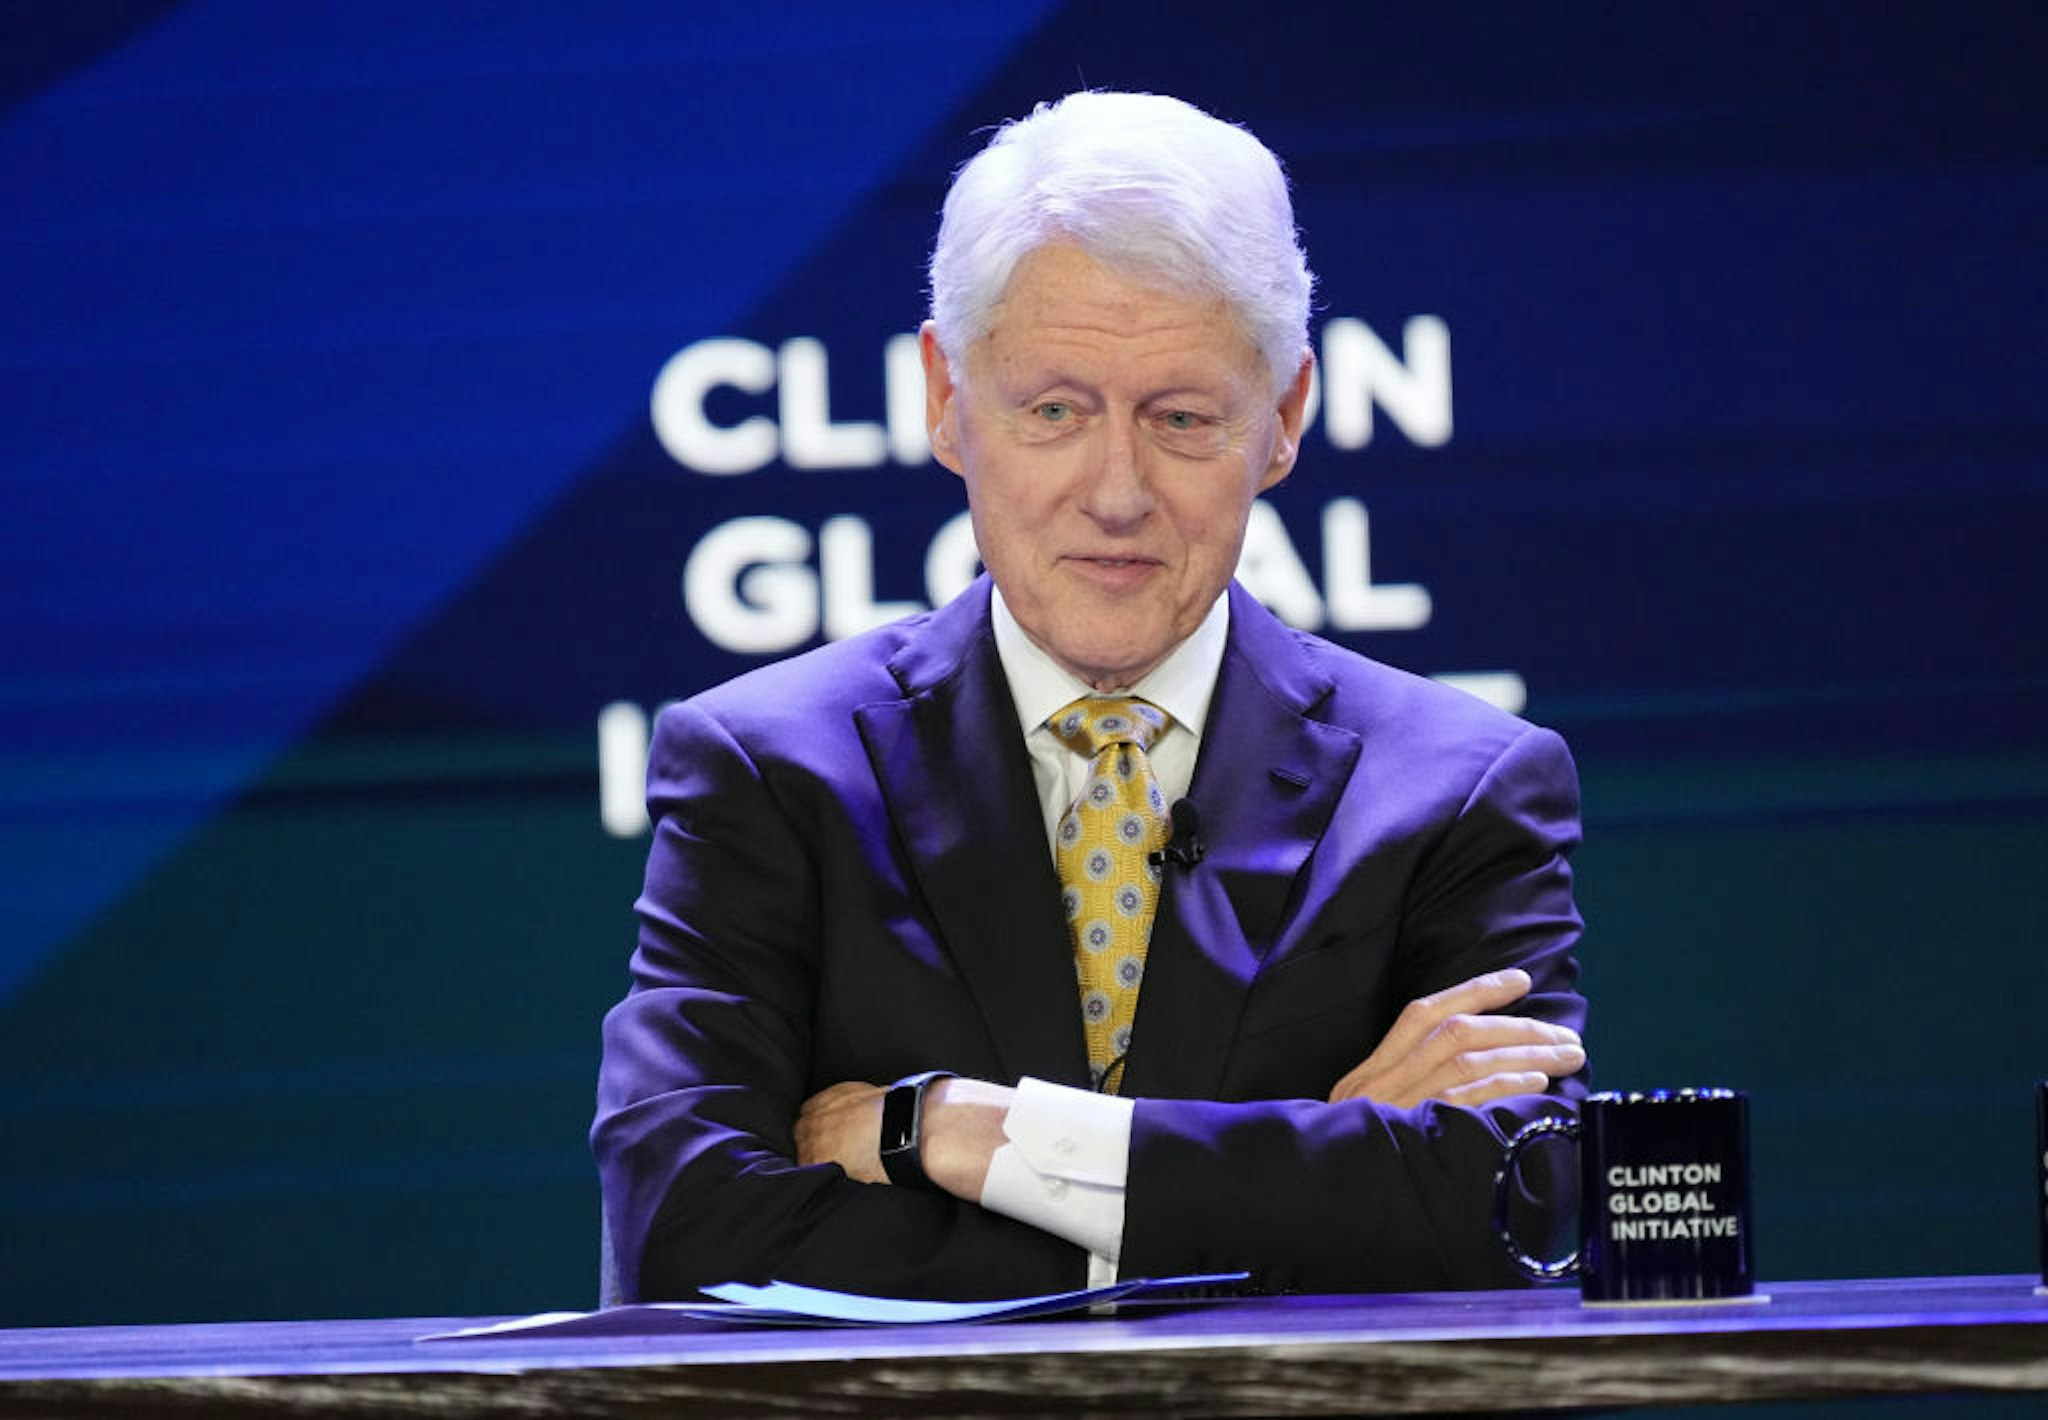 NEW YORK, NEW YORK - SEPTEMBER 19: Former President Bill Clinton speaks during the Clinton Global Initiative (CGI) meeting at the Hilton Midtown on September 19, 2023 in New York City. (Photo by John Nacion/WireImage)